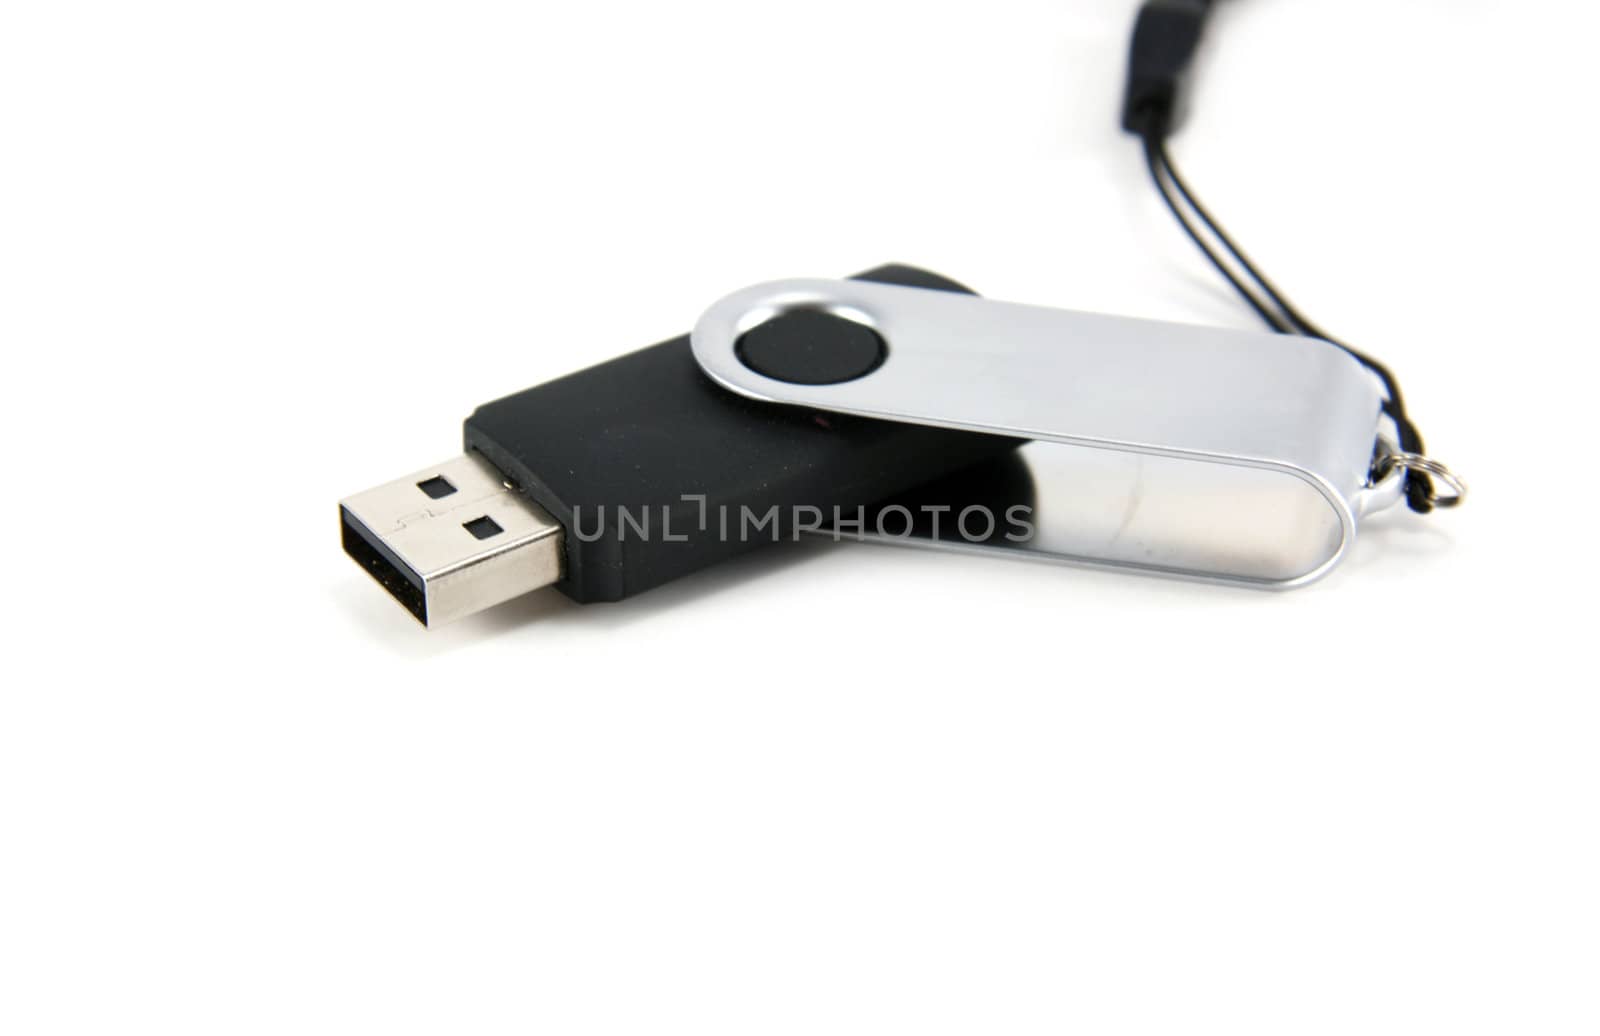 USB Memory Stick by ChrisAlleaume